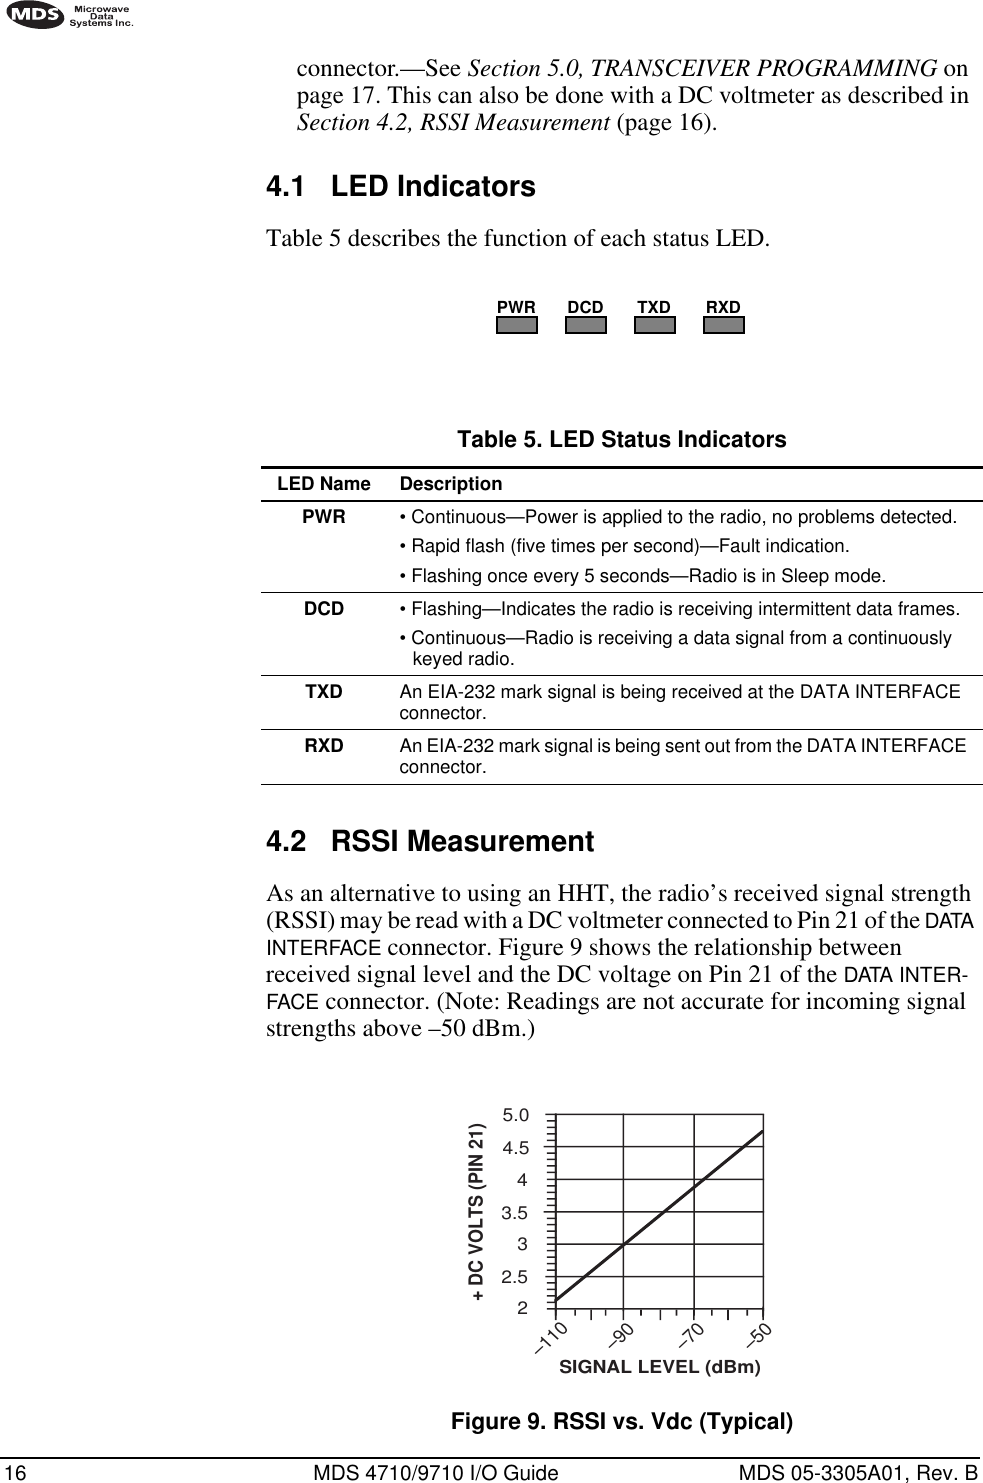 16 MDS 4710/9710 I/O Guide MDS 05-3305A01, Rev. Bconnector.—See Section 5.0, TRANSCEIVER PROGRAMMING on page 17. This can also be done with a DC voltmeter as described in Section 4.2, RSSI Measurement (page 16).4.1 LED IndicatorsTable 5 describes the function of each status LED.4.2 RSSI MeasurementAs an alternative to using an HHT, the radio’s received signal strength (RSSI) may be read with a DC voltmeter connected to Pin 21 of the DATA INTERFACE connector. Figure 9 shows the relationship between received signal level and the DC voltage on Pin 21 of the DATA INTER-FACE connector. (Note: Readings are not accurate for incoming signal strengths above –50 dBm.)Invisible place holderFigure 9. RSSI vs. Vdc (Typical)PWR DCD TXD RXDTable 5. LED Status Indicators LED Name DescriptionPWR • Continuous—Power is applied to the radio, no problems detected.• Rapid flash (five times per second)—Fault indication.• Flashing once every 5 seconds—Radio is in Sleep mode.DCD • Flashing—Indicates the radio is receiving intermittent data frames.• Continuous—Radio is receiving a data signal from a continuously keyed radio.TXD An EIA-232 mark signal is being received at the DATA INTERFACE connector.RXD An EIA-232 mark signal is being sent out from the DATA INTERFACE connector.22.533.54–110–90–70–50+ DC VOLTS (PIN 21)SIGNAL LEVEL (dBm)4.55.0